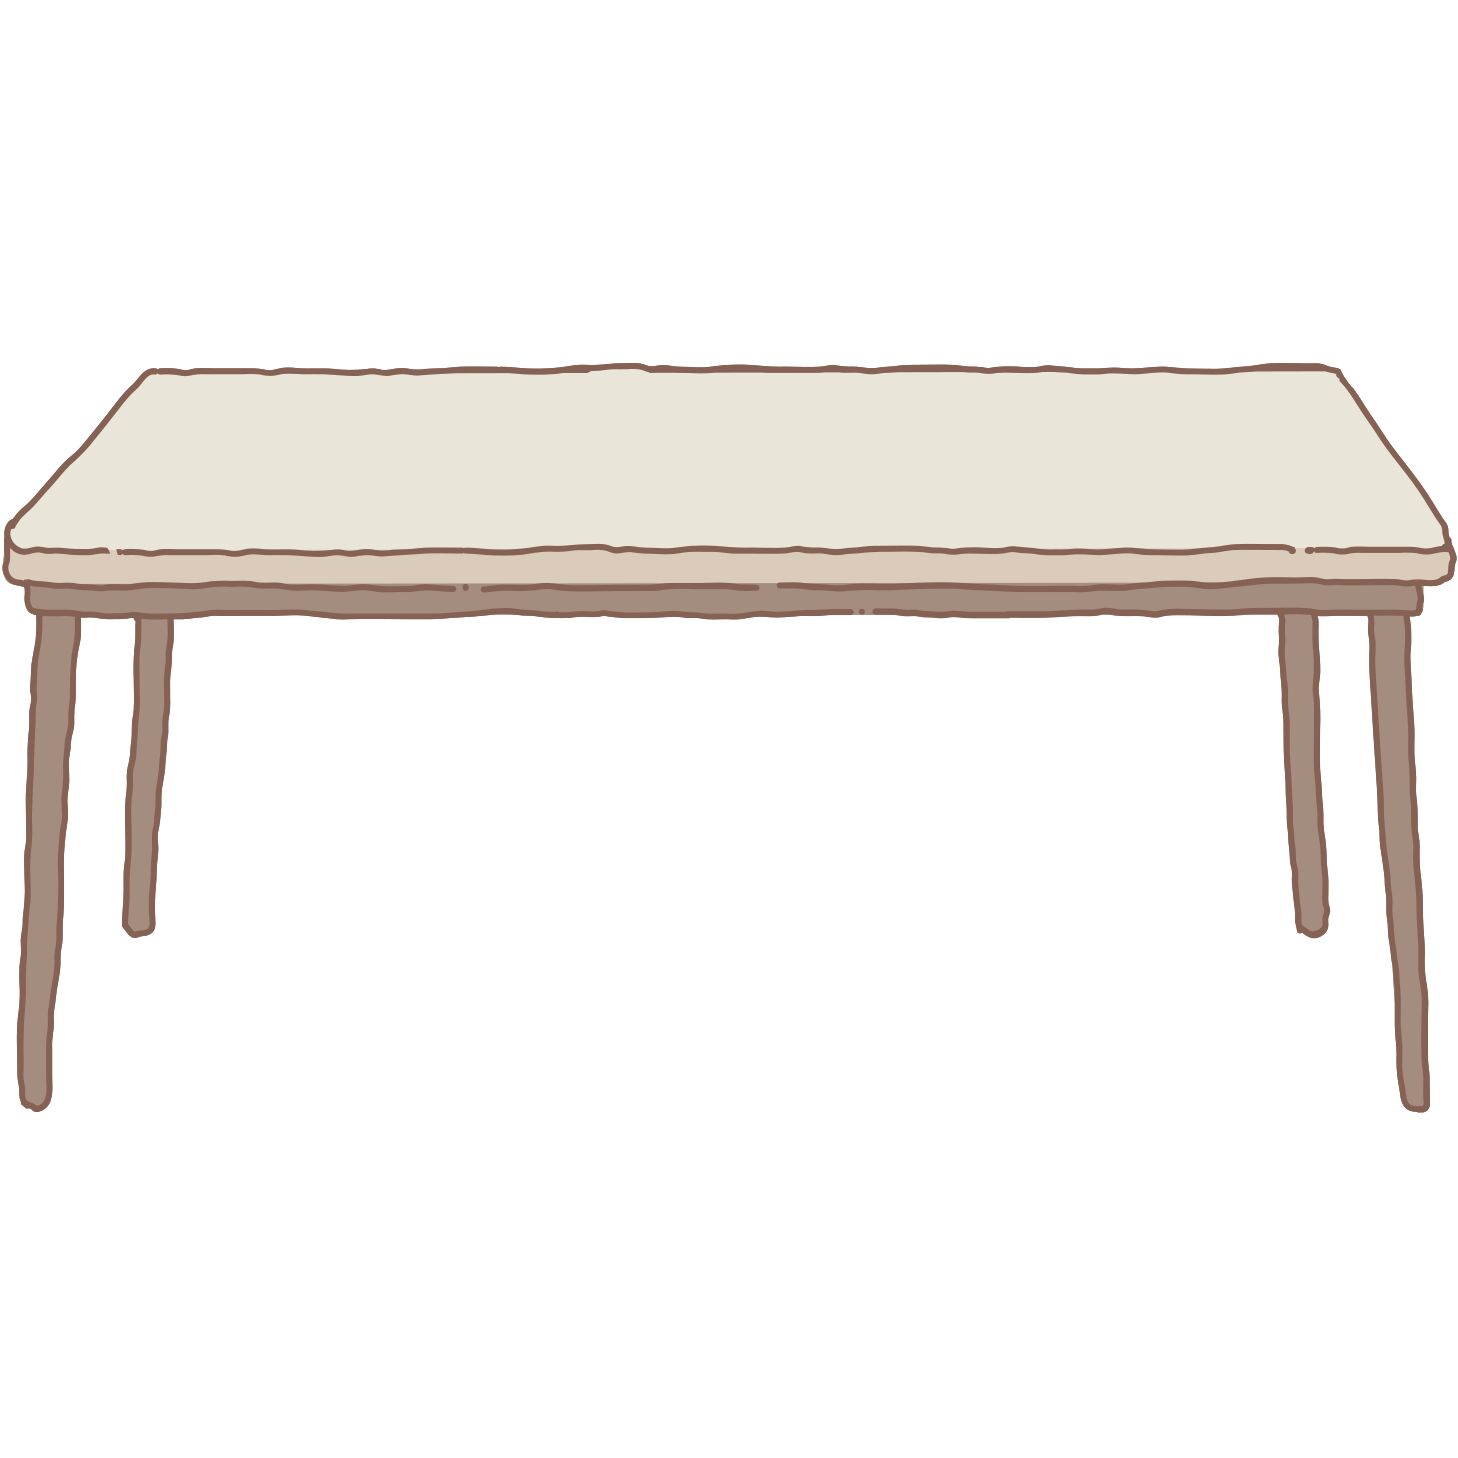 English vocabulary with pictures - Furniture - Table